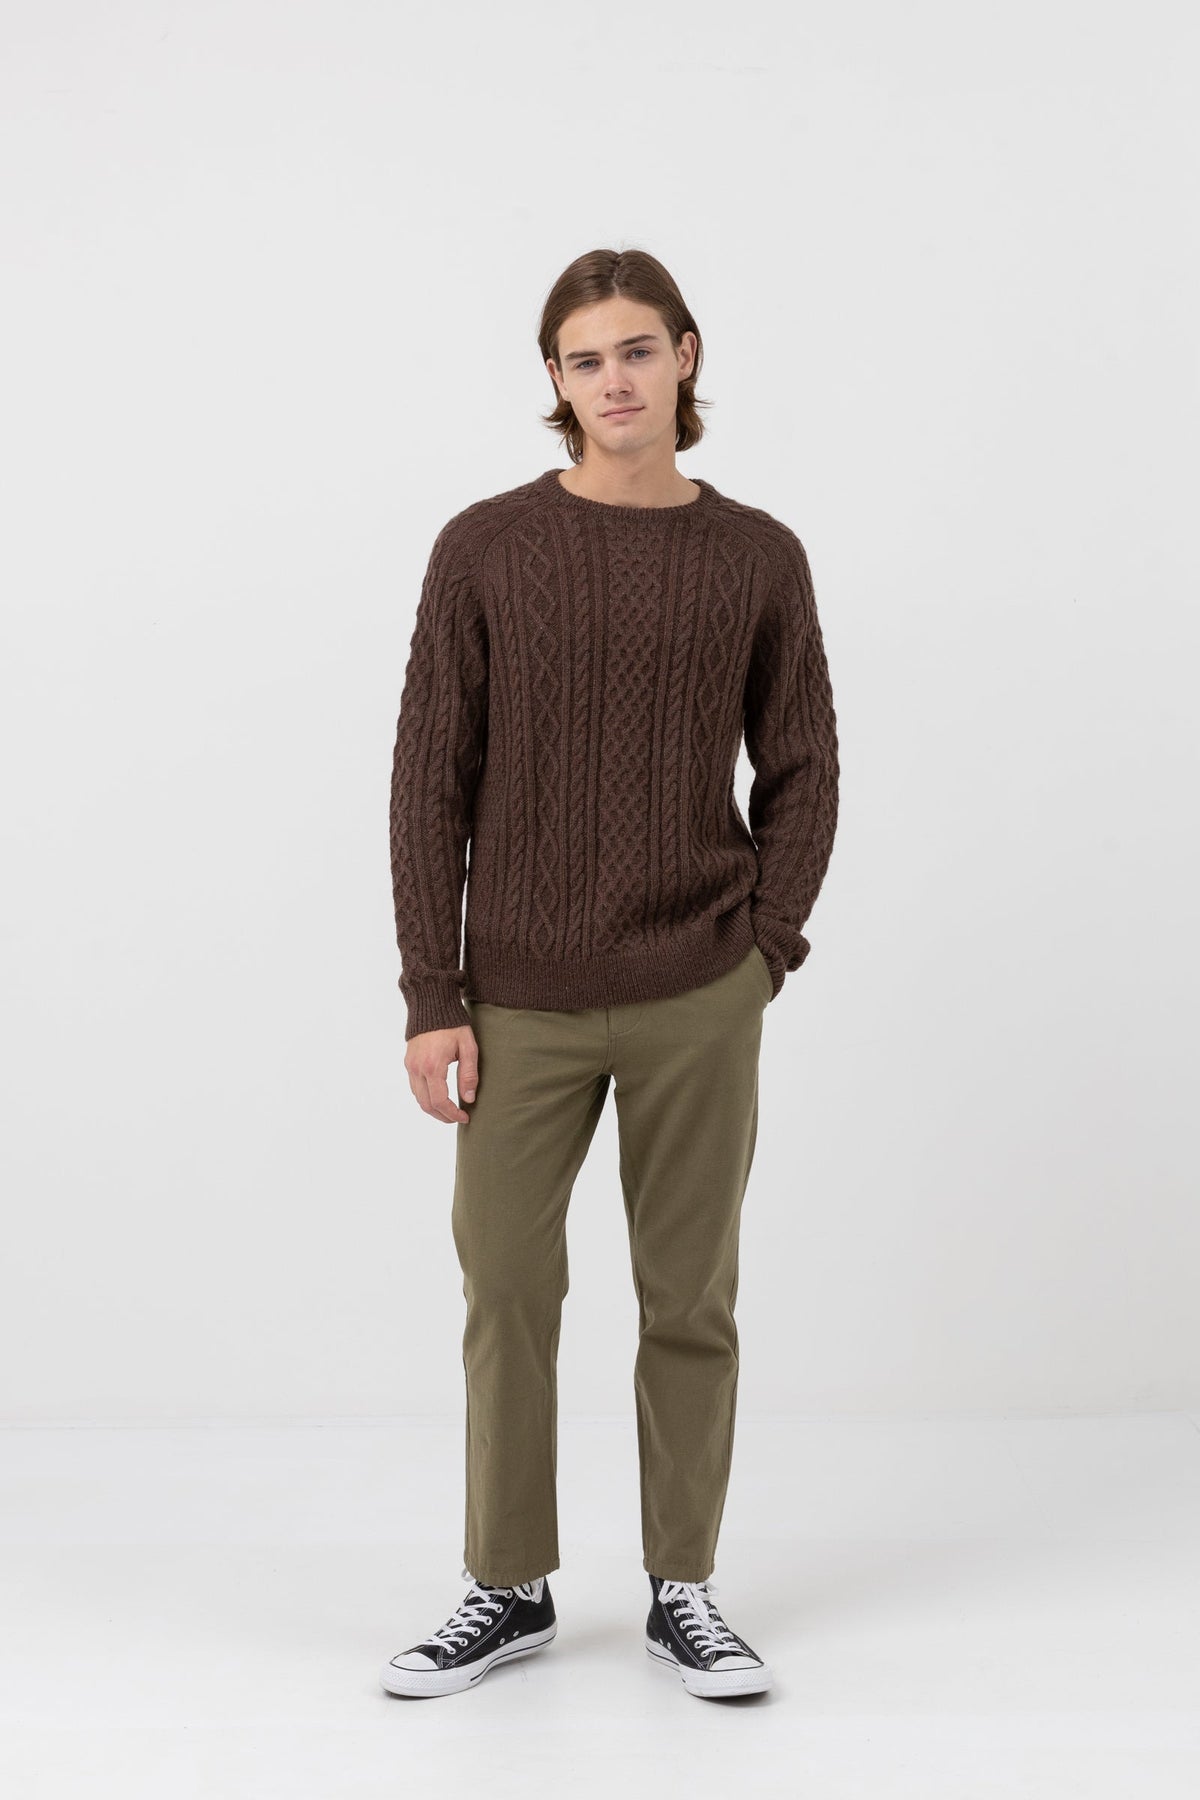 Mohair Fishermans Knit - BROWN